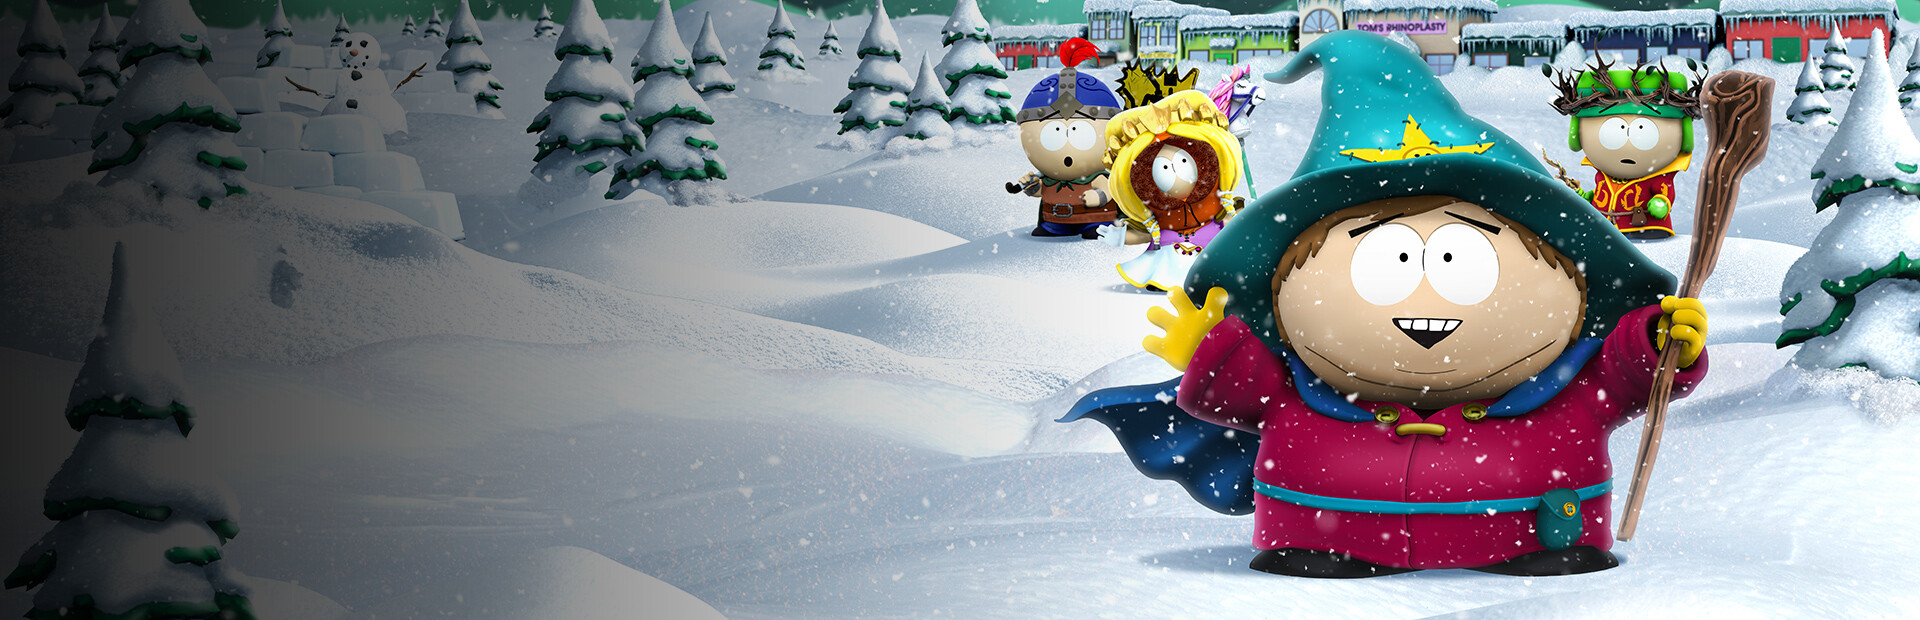 SOUTH PARK: SNOW DAY! cover image